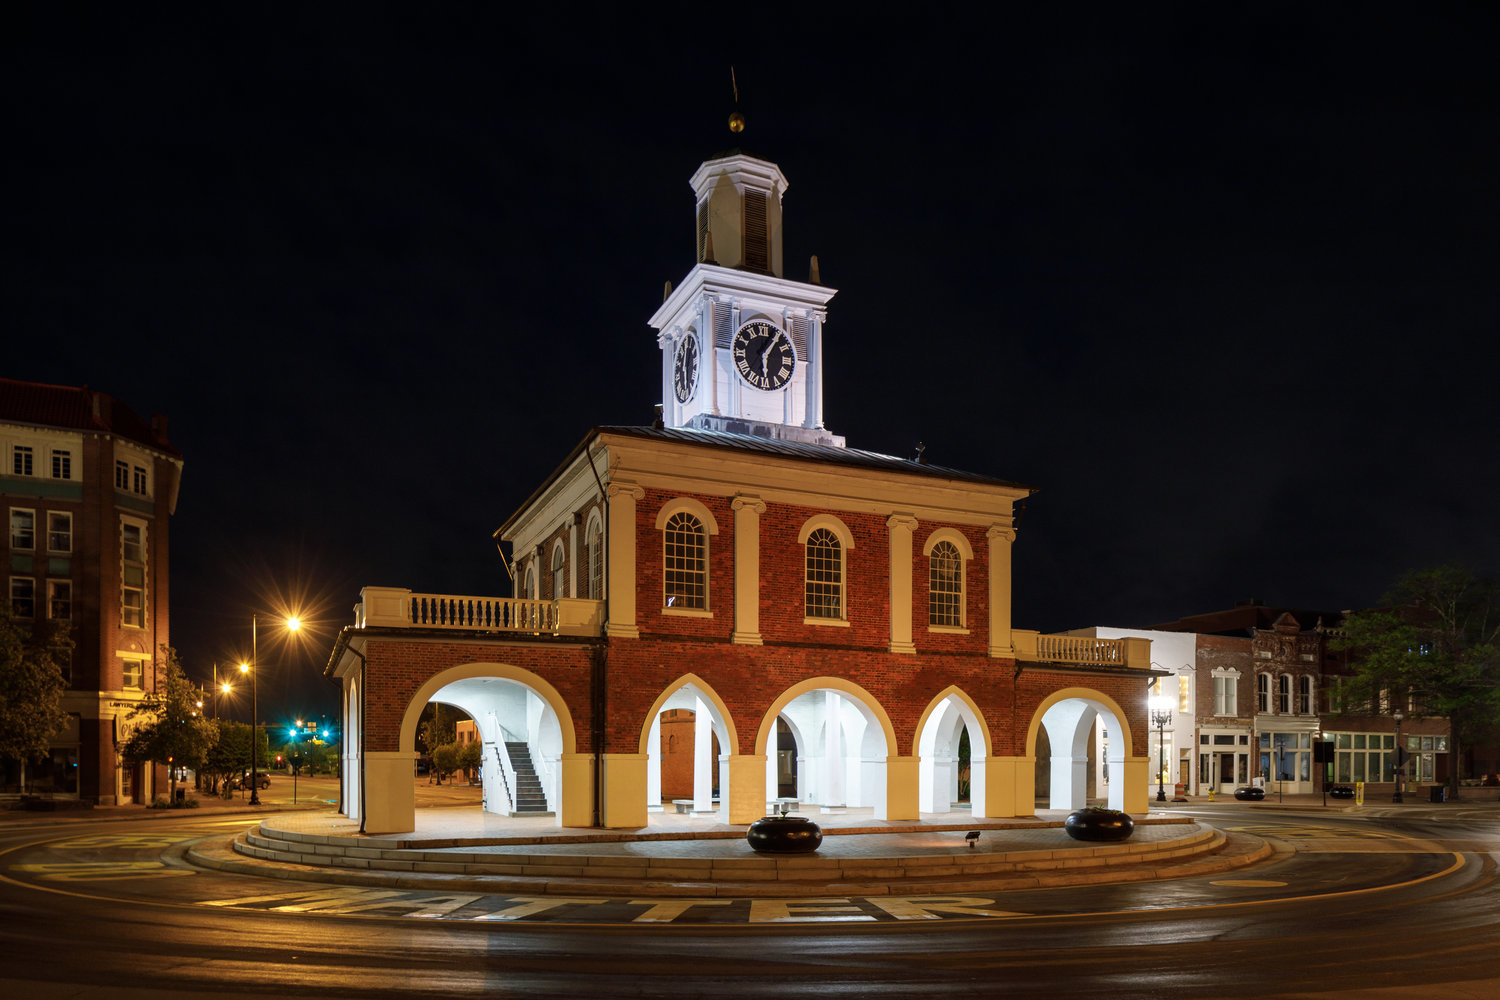 City officials are working on a plan to repurpose the historic Market House for history and educational programs.